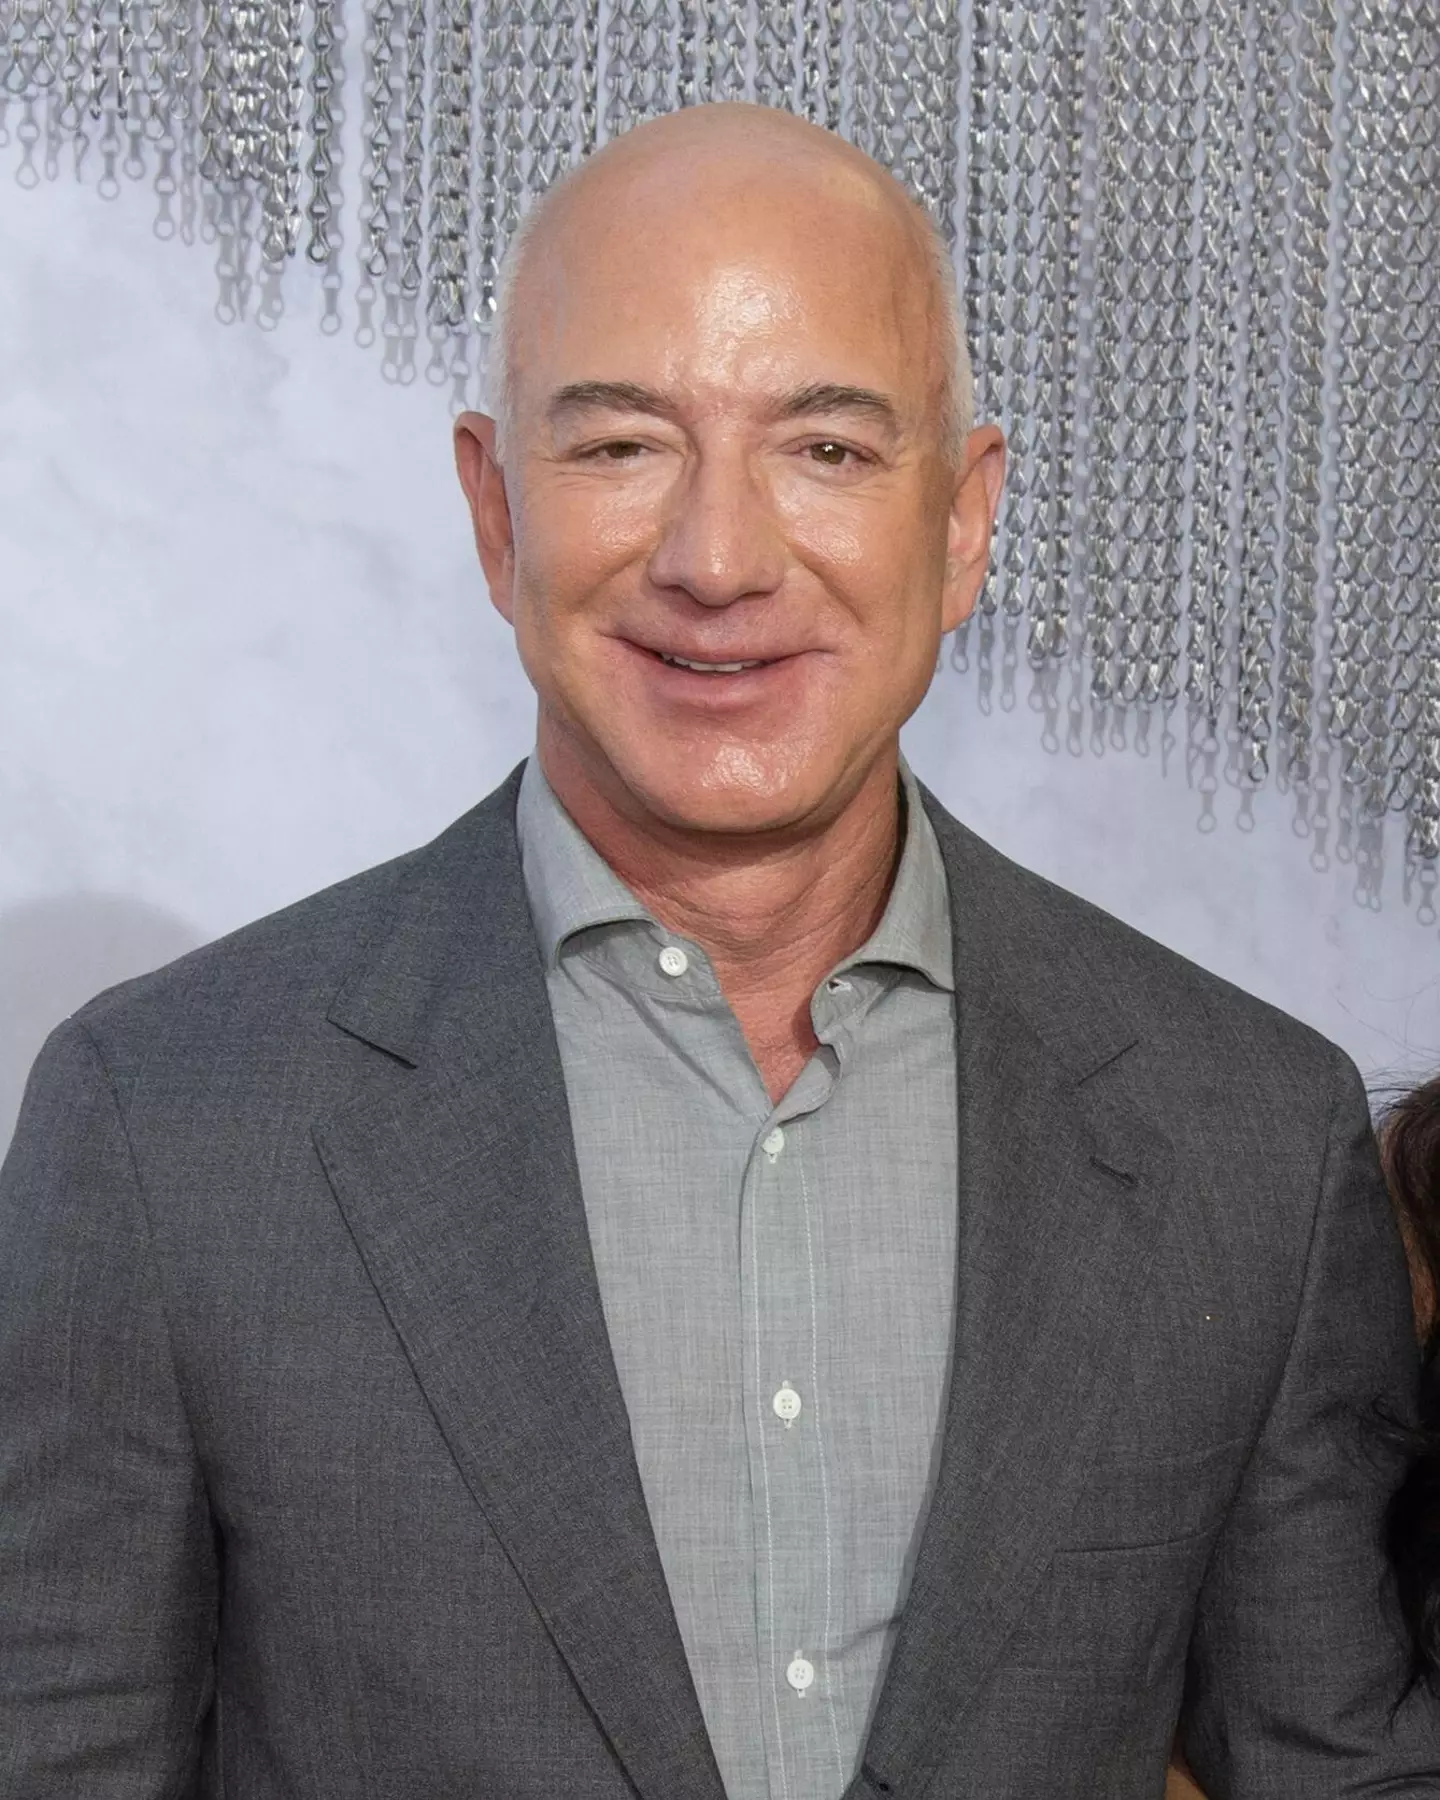 Jeff Bezos stepped down as CEO of Amazon last year.